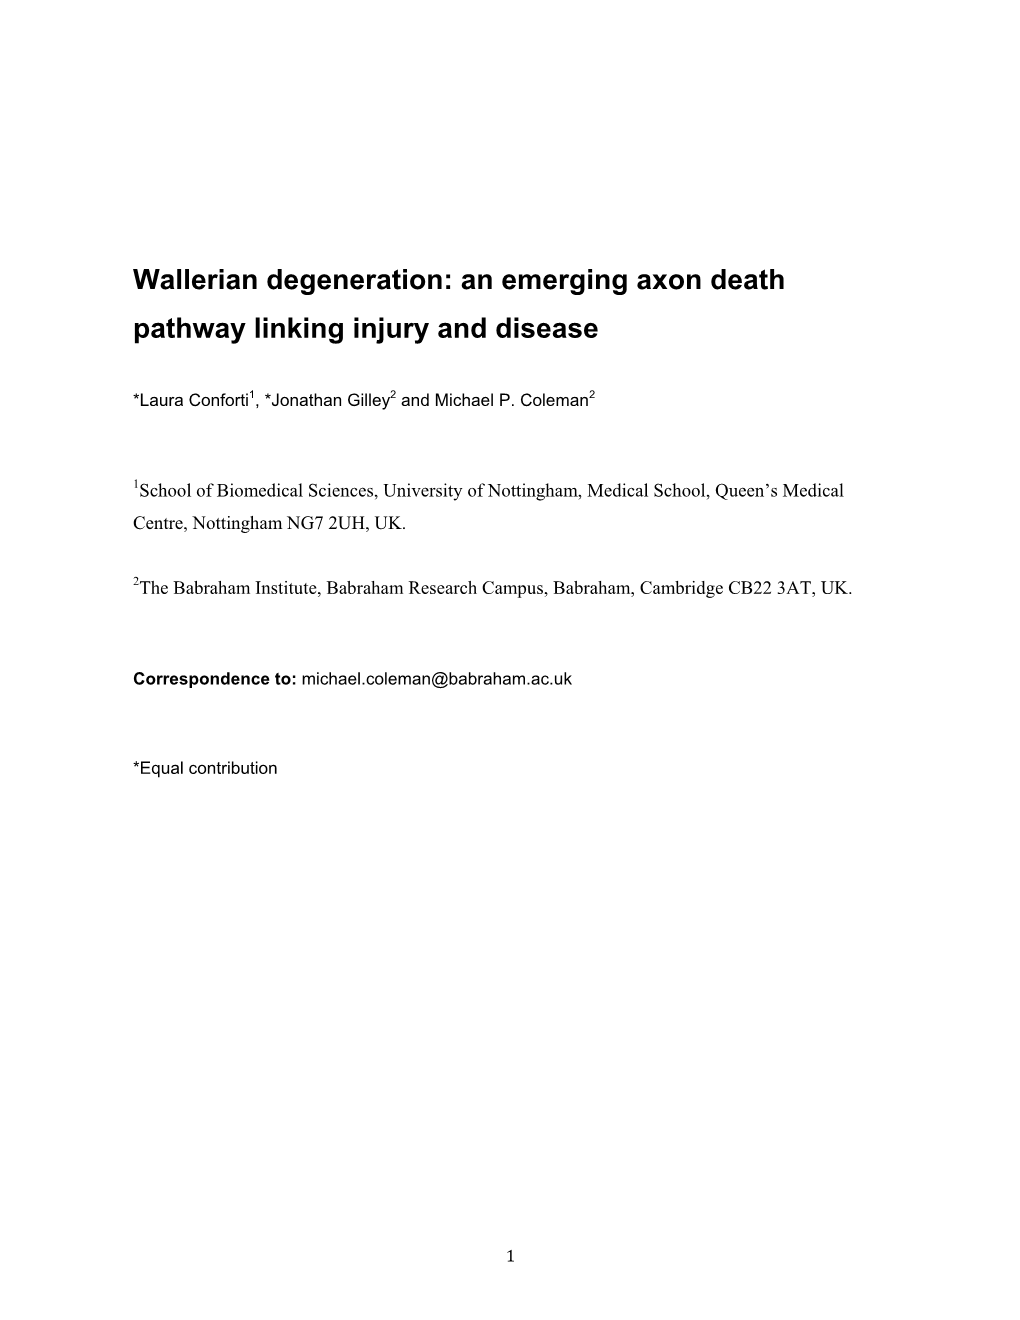 Wallerian Degeneration: an Emerging Axon Death Pathway Linking Injury and Disease